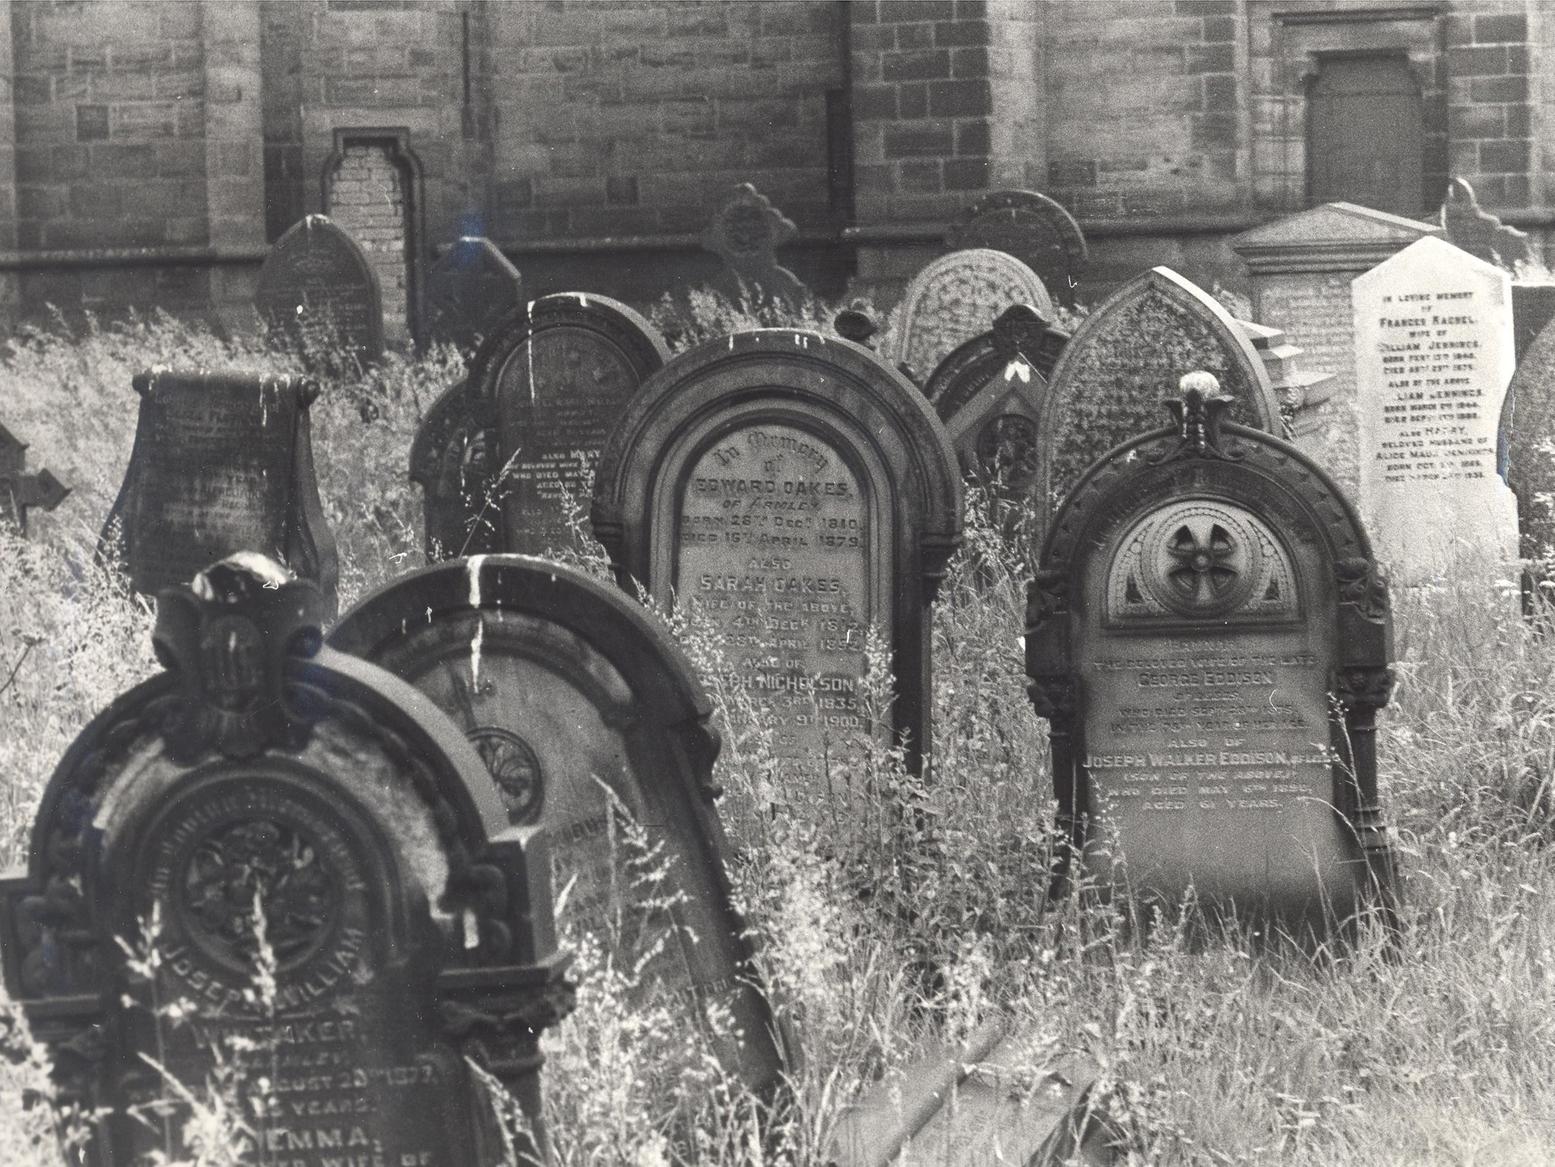 Gravestones at St Bartholomew's Church which were proposed to be removed.